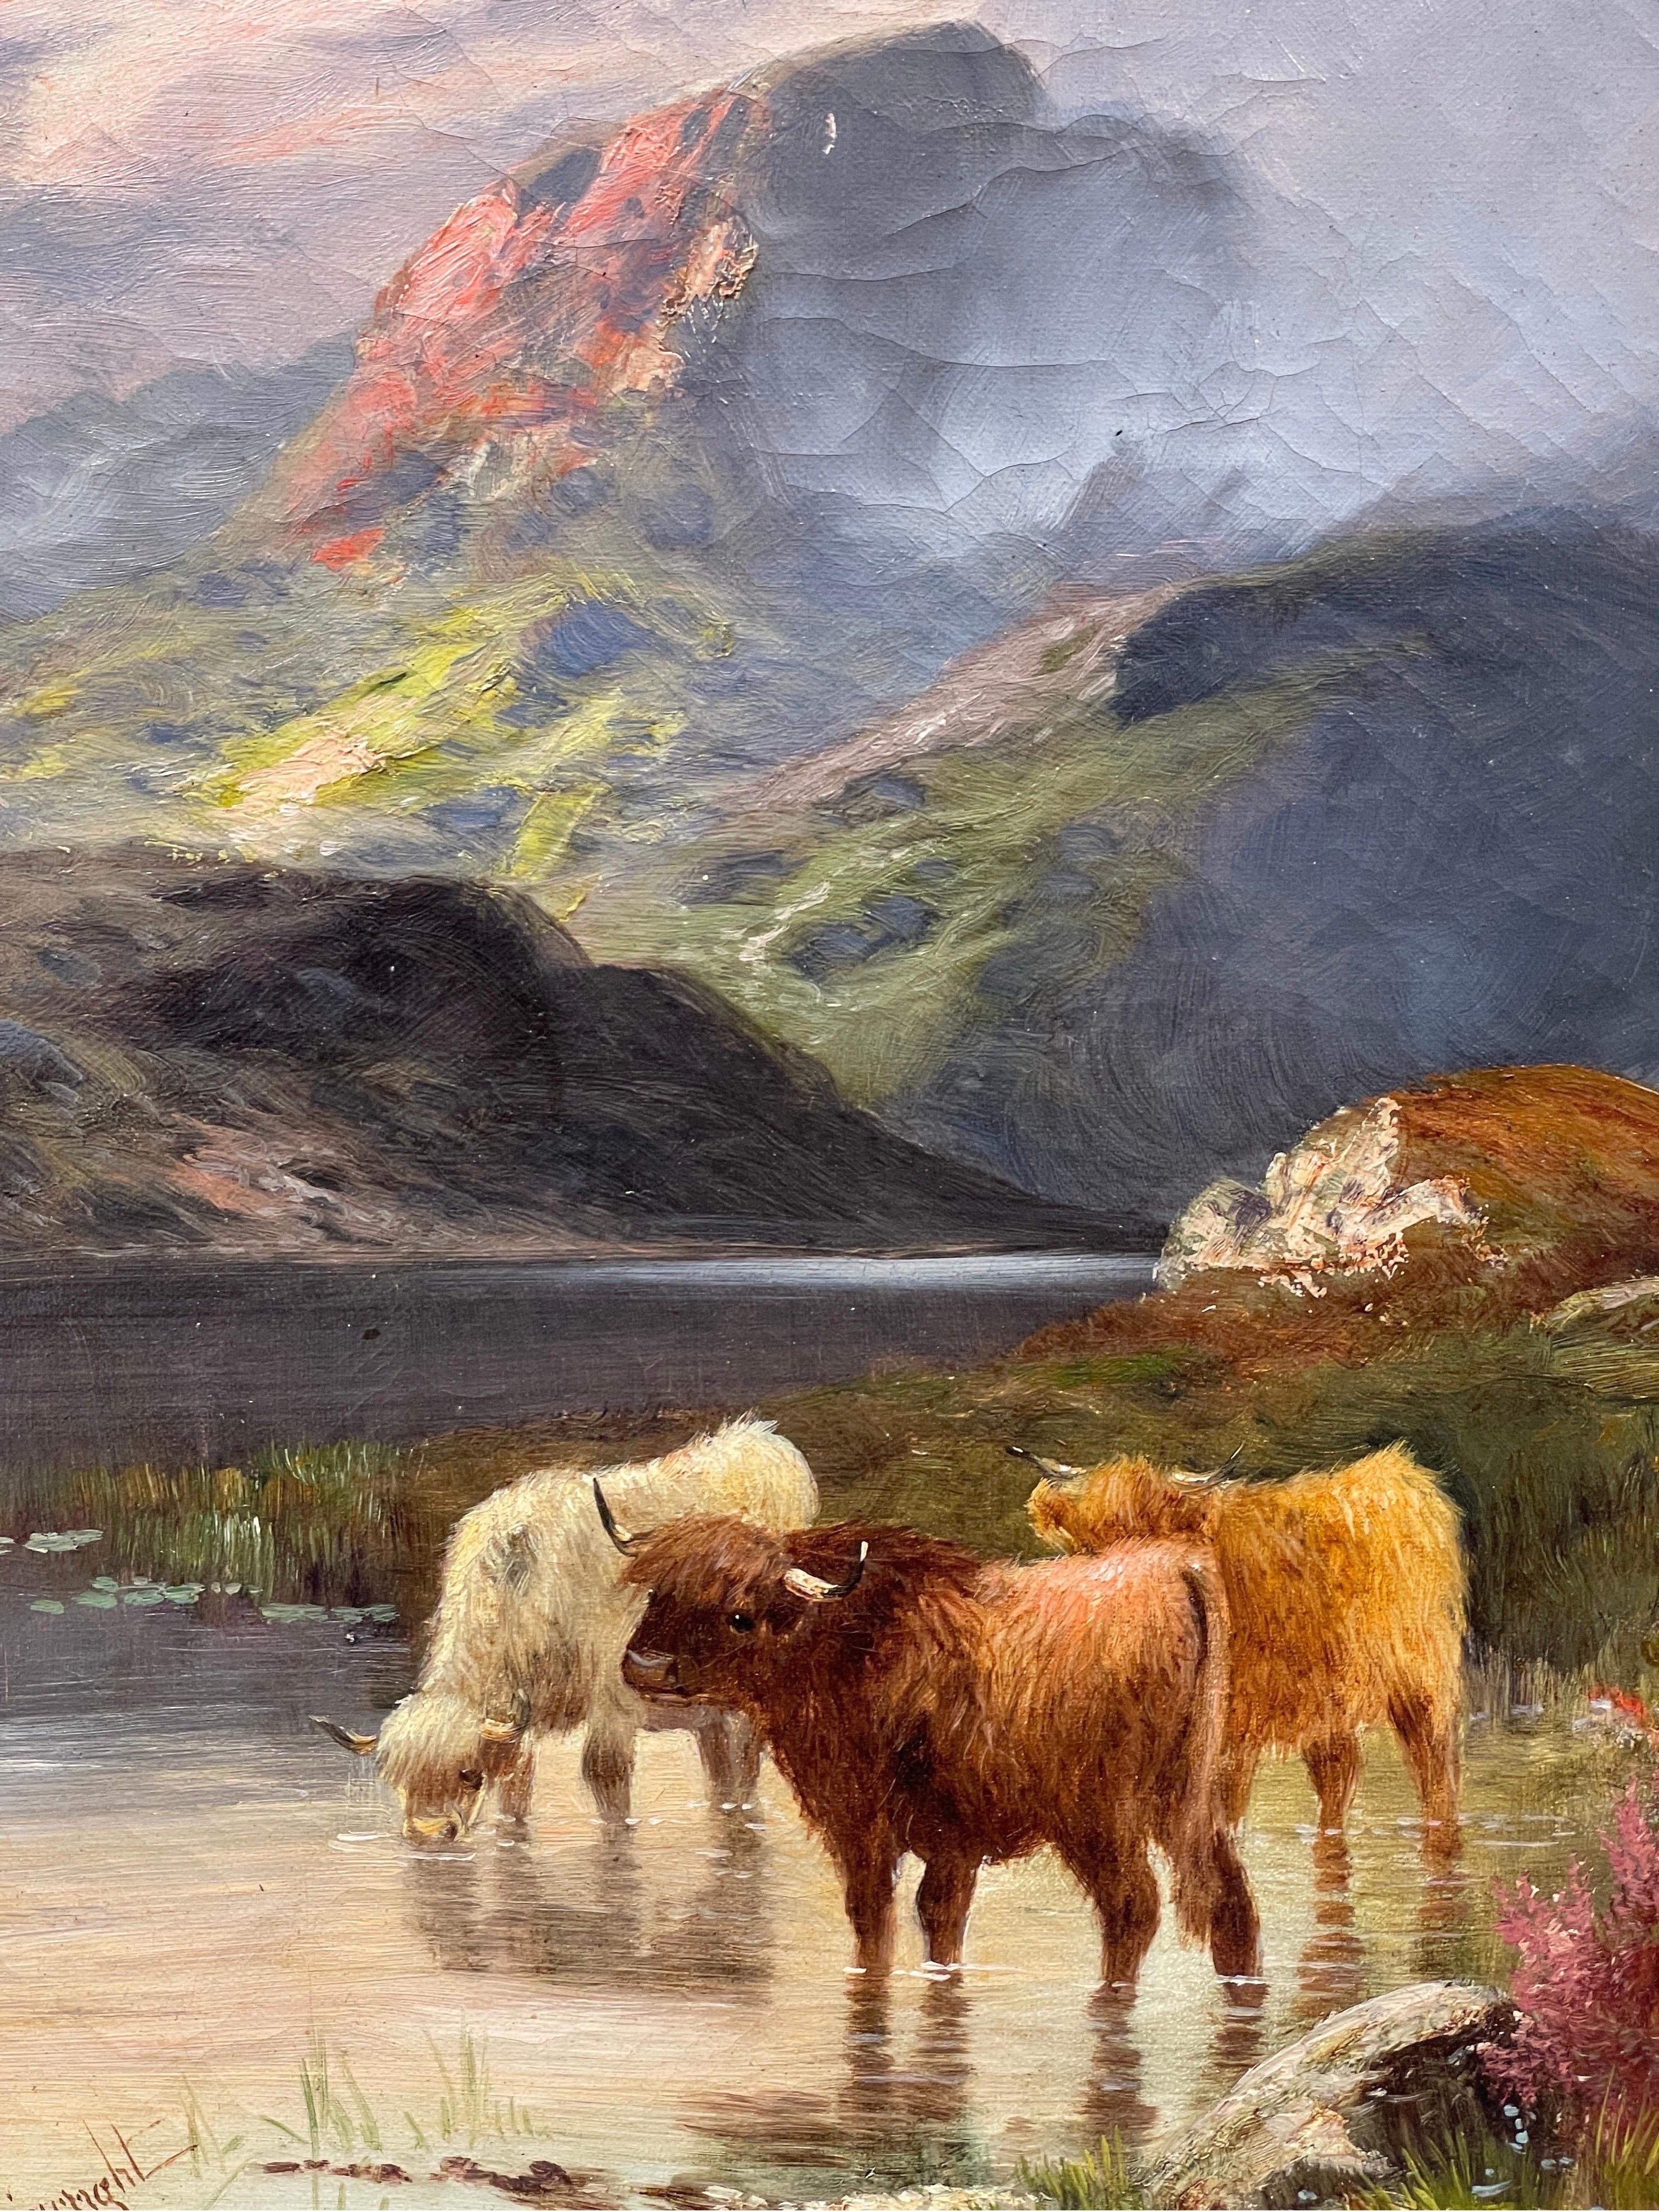 Highland Cattle
by P. Wainwright, circa 1890's
signed lower left corner
oil painting on canvas, framed: 24 x 20 inches
condition: very good and presentable
provenance: from a private UK collection